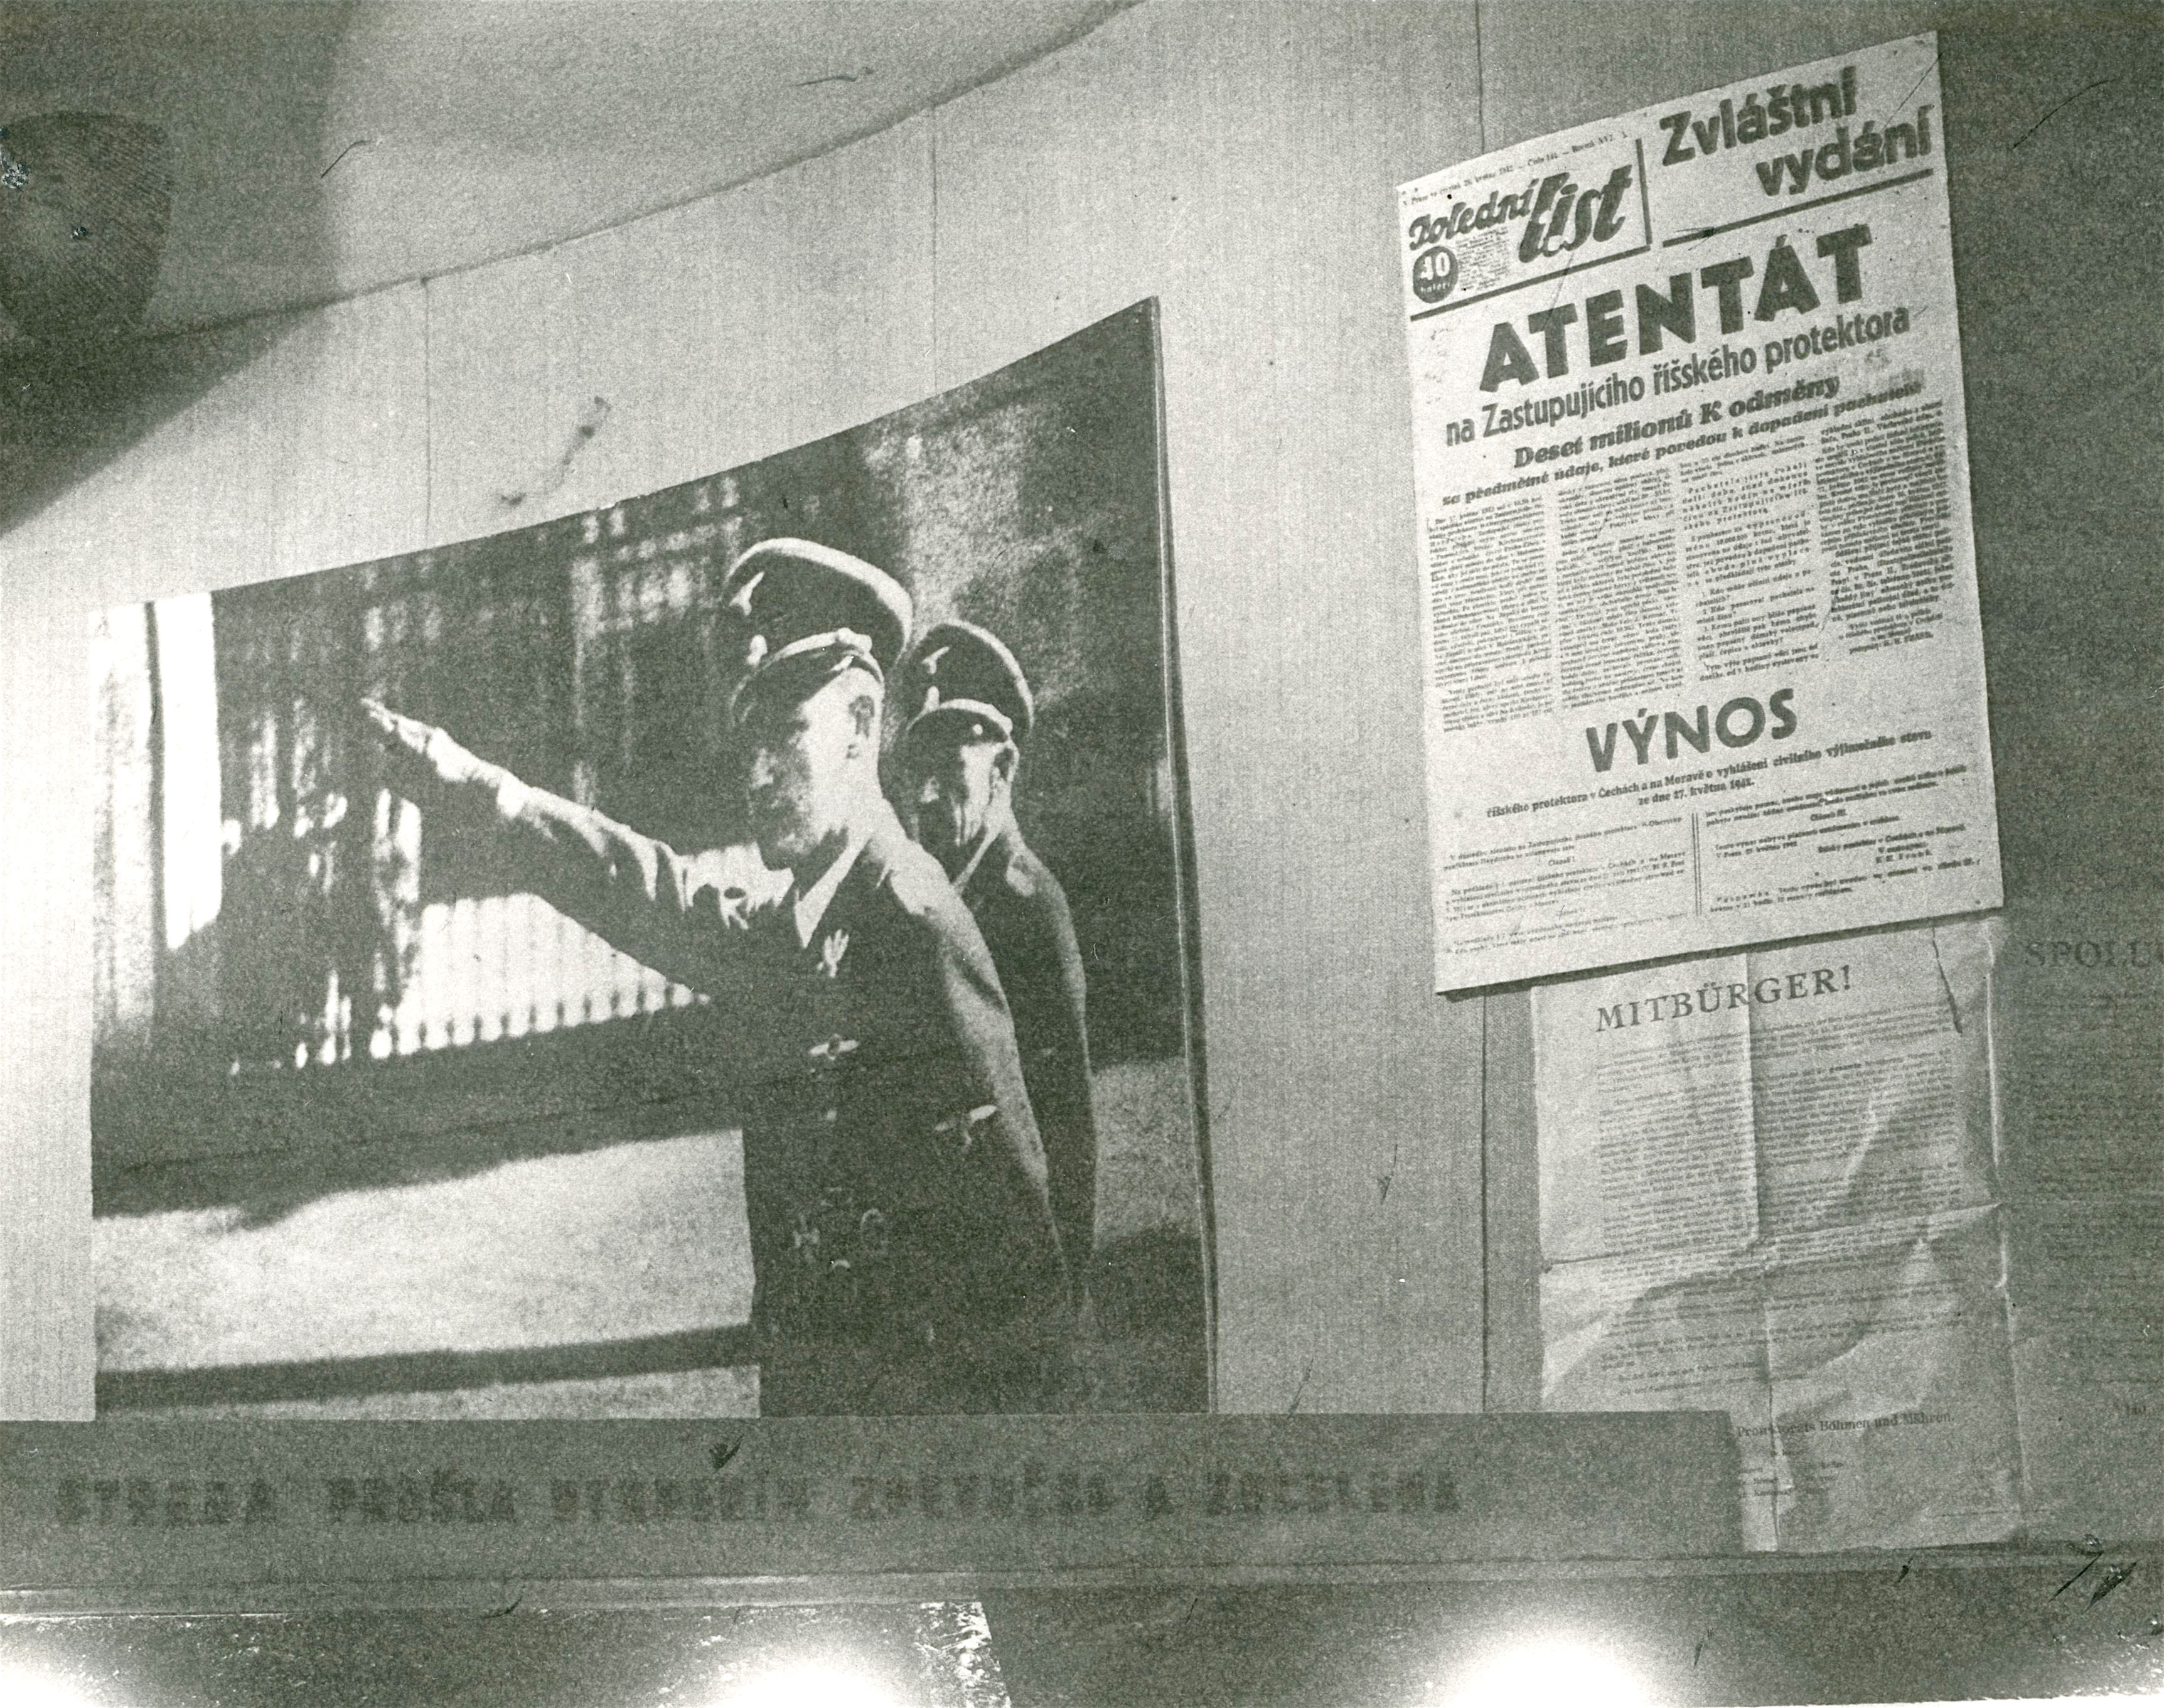 Notices in Czech and German regarding the assassination of Reinhard Heydrich appear in occupied Czechoslovakia. Newspaper in photo dated 1942. The Museum of Danish Resistance 1940-1945.